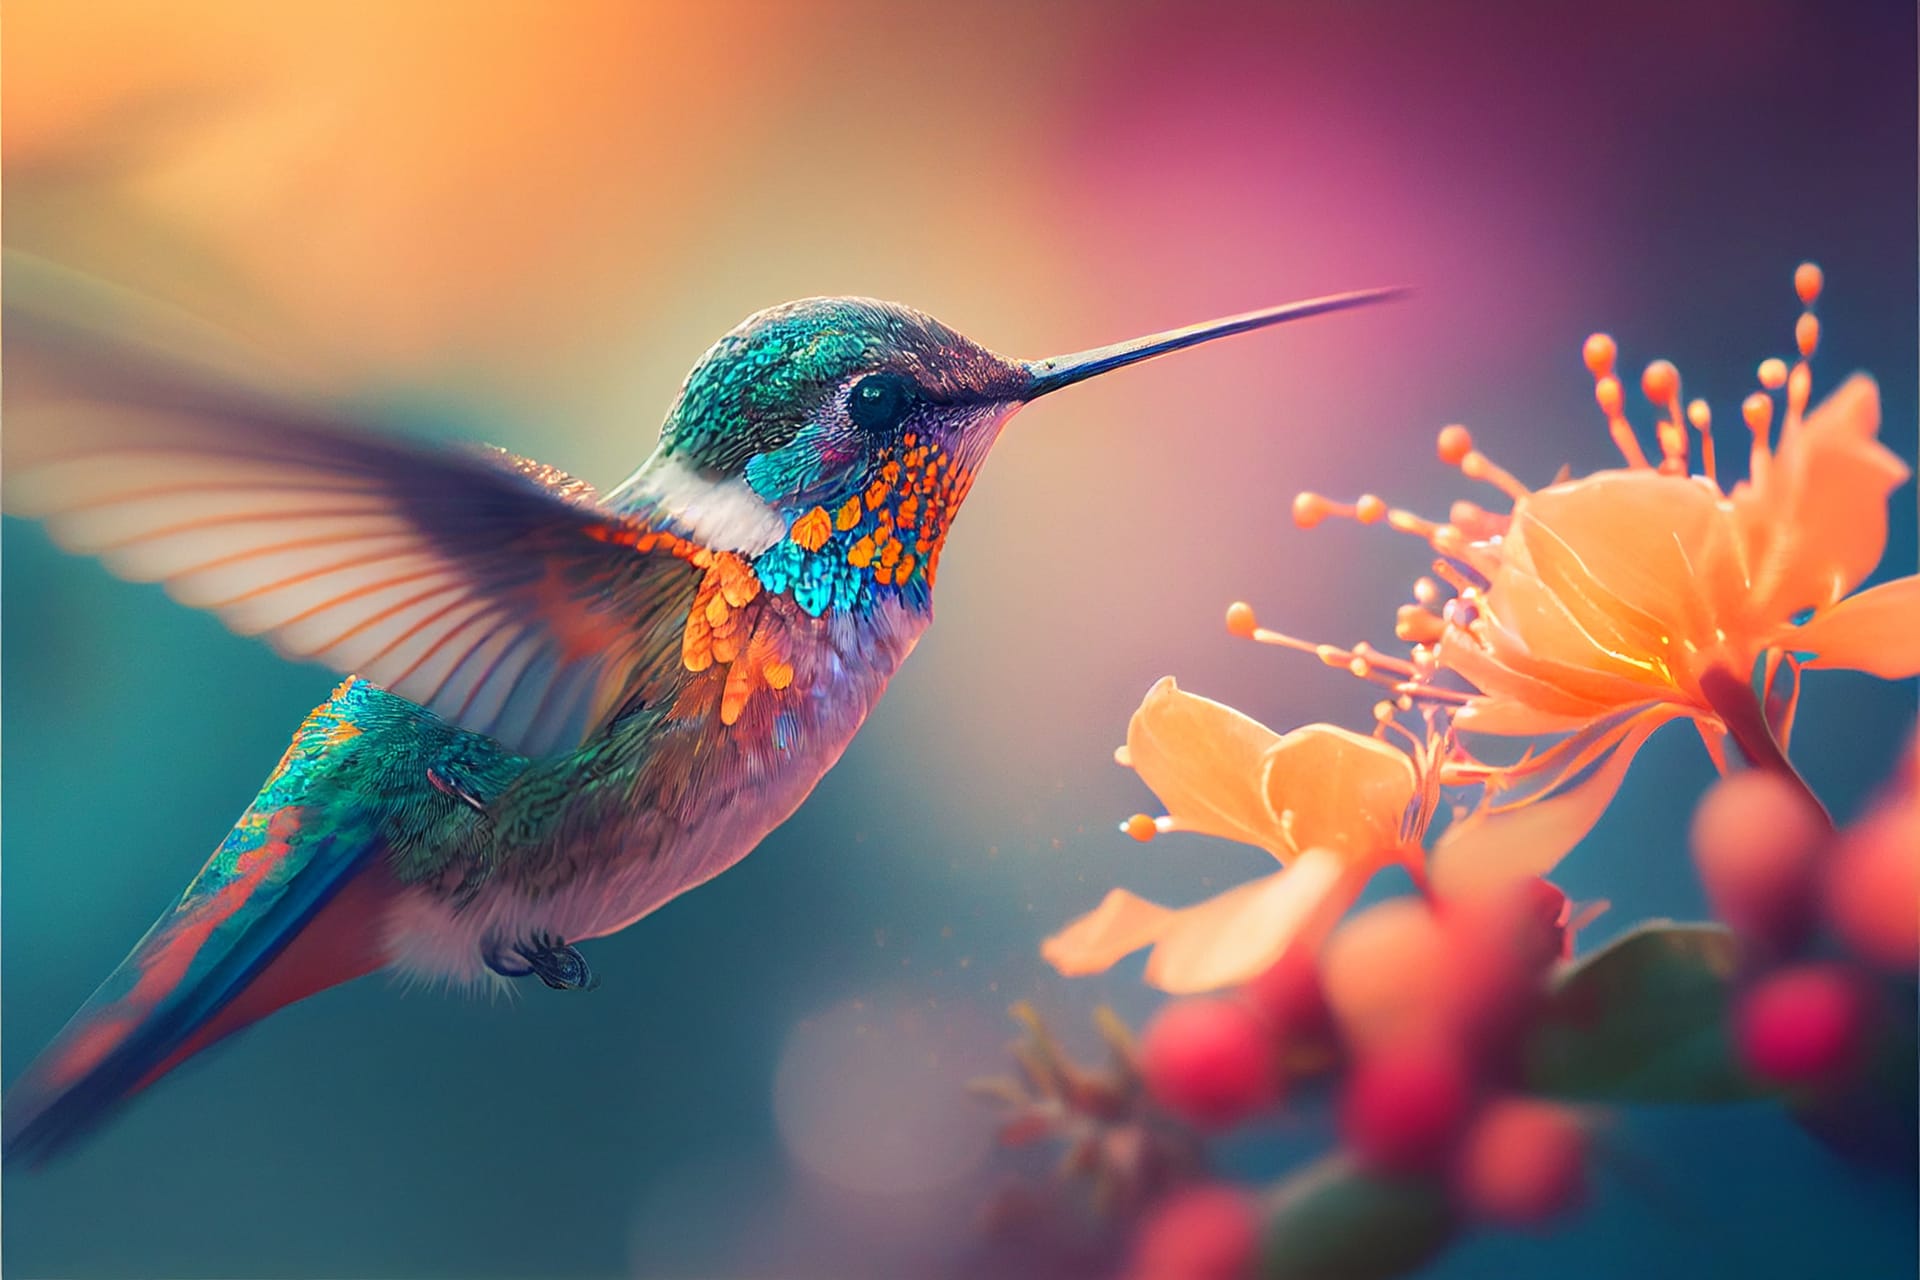 Orange romantic natural floral background with iridescent blue hummingbird flying